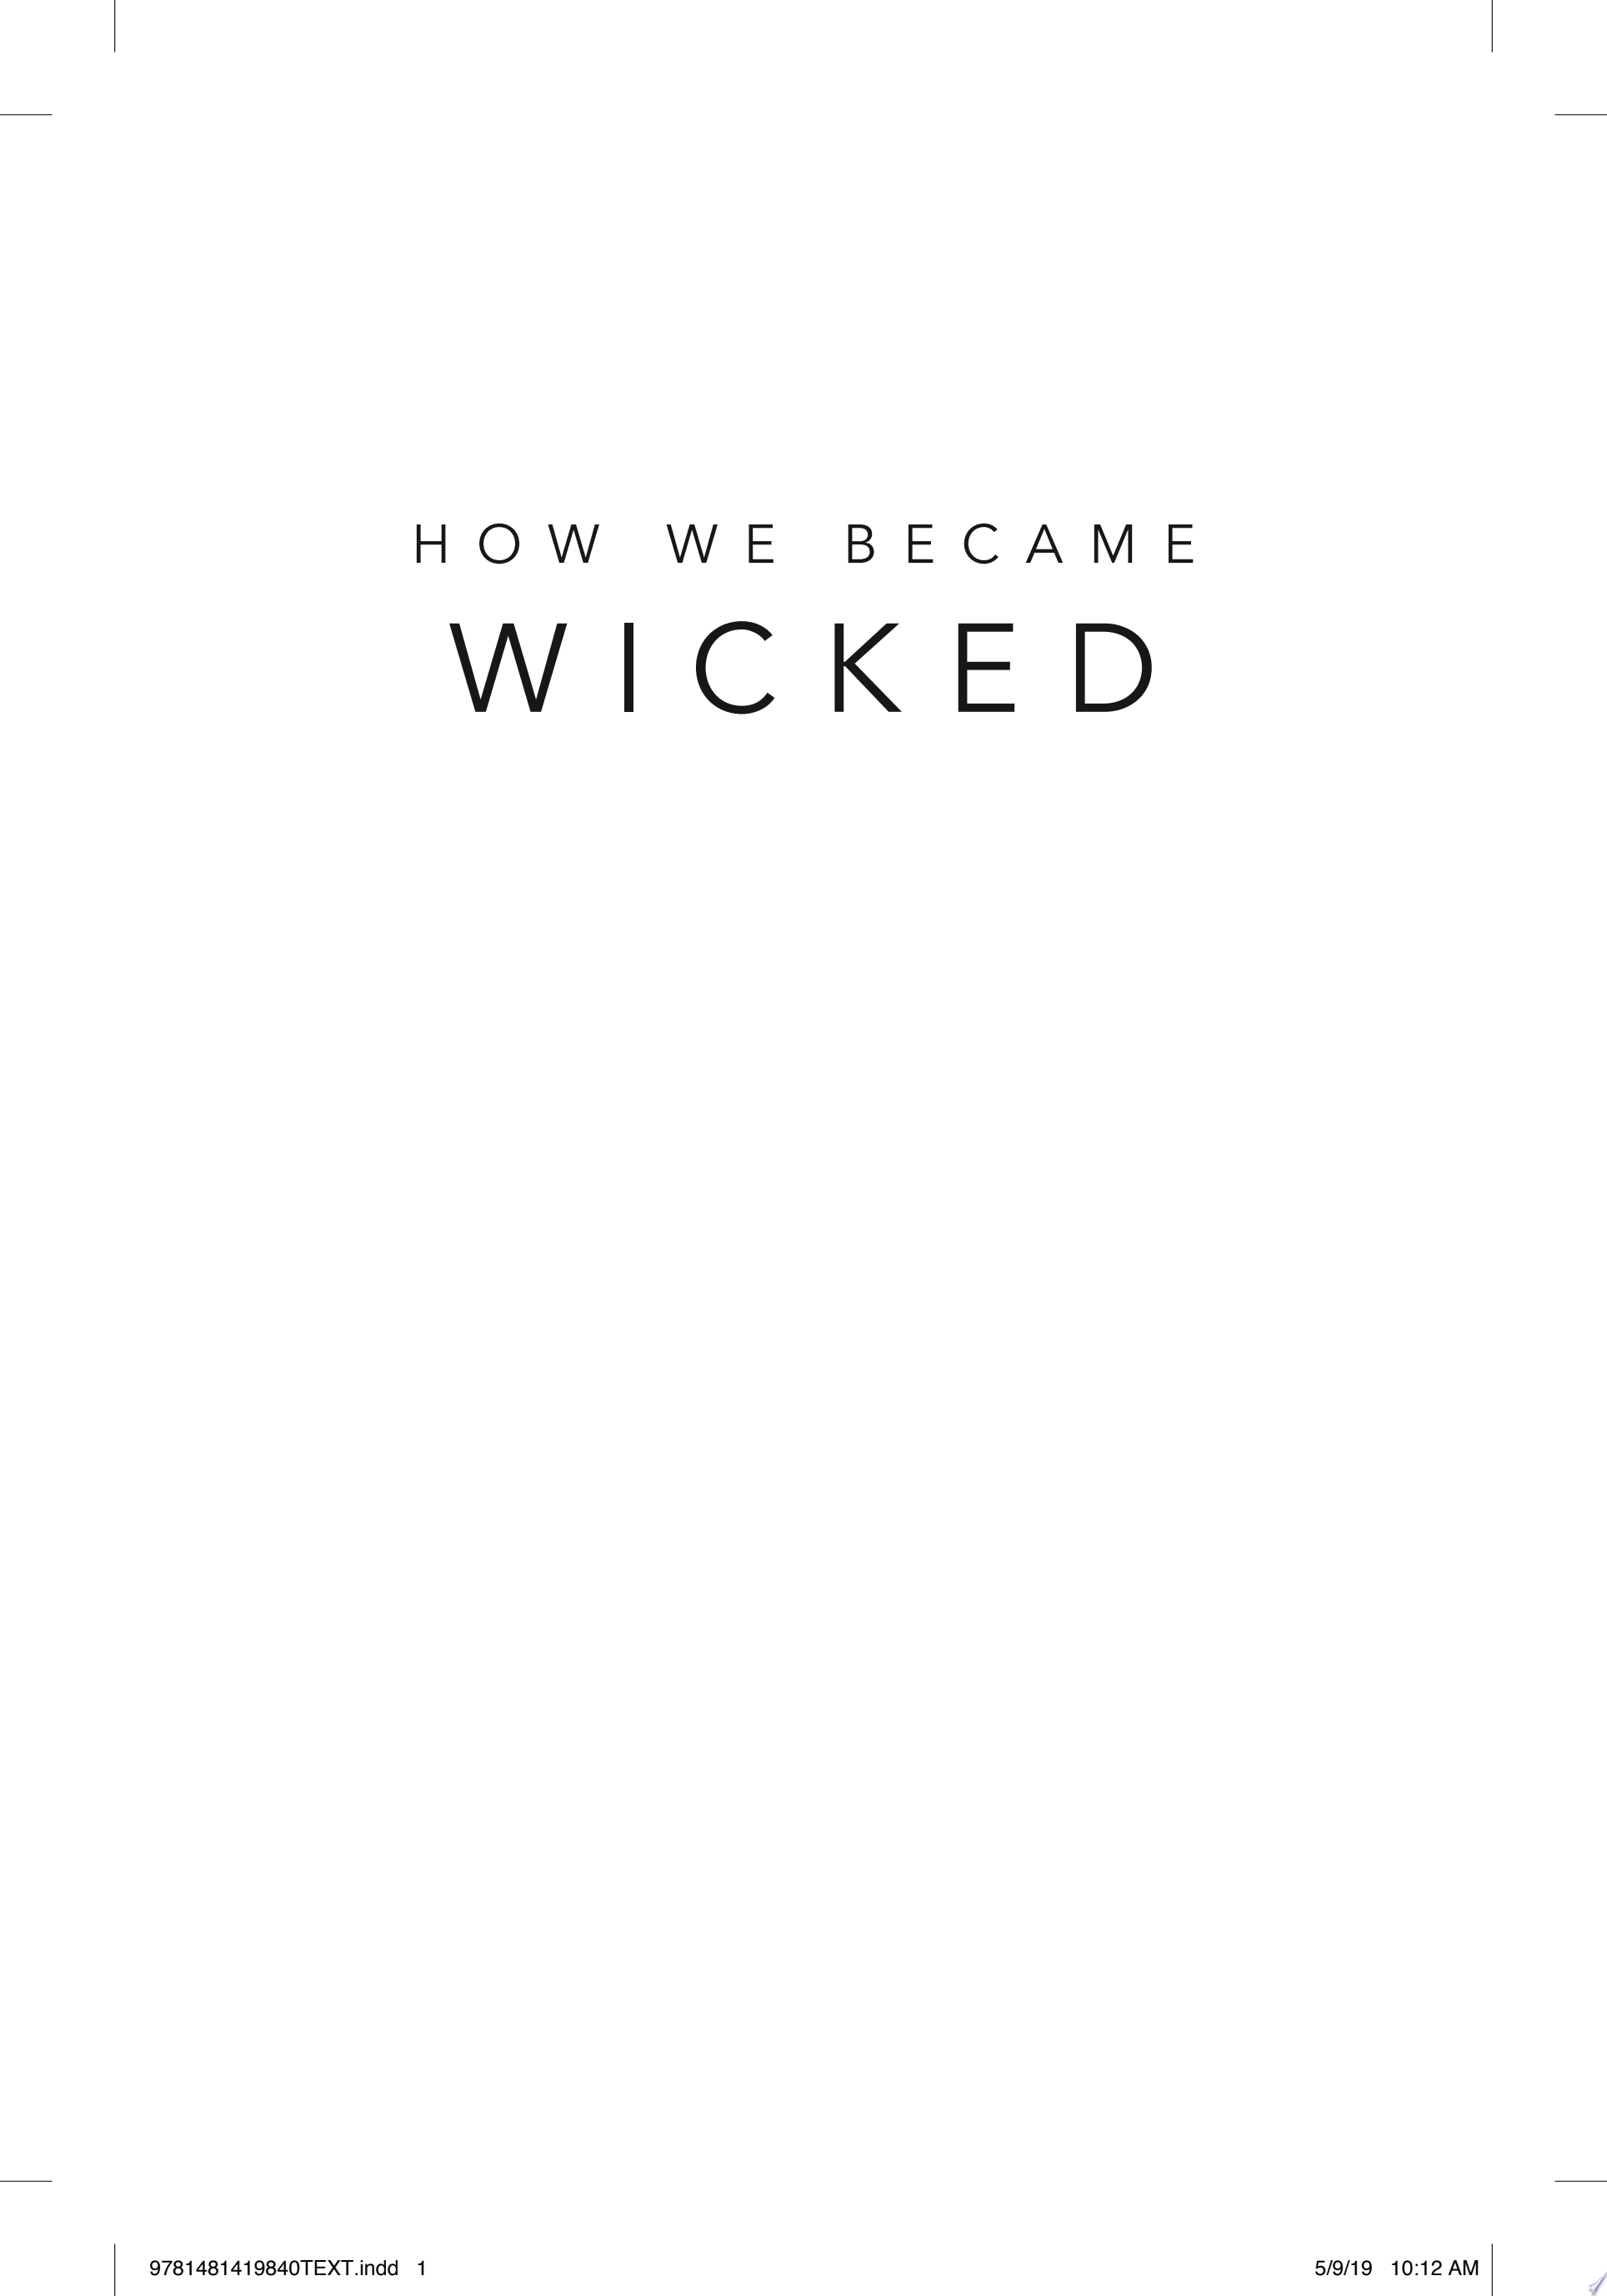 Image for "How We Became Wicked"